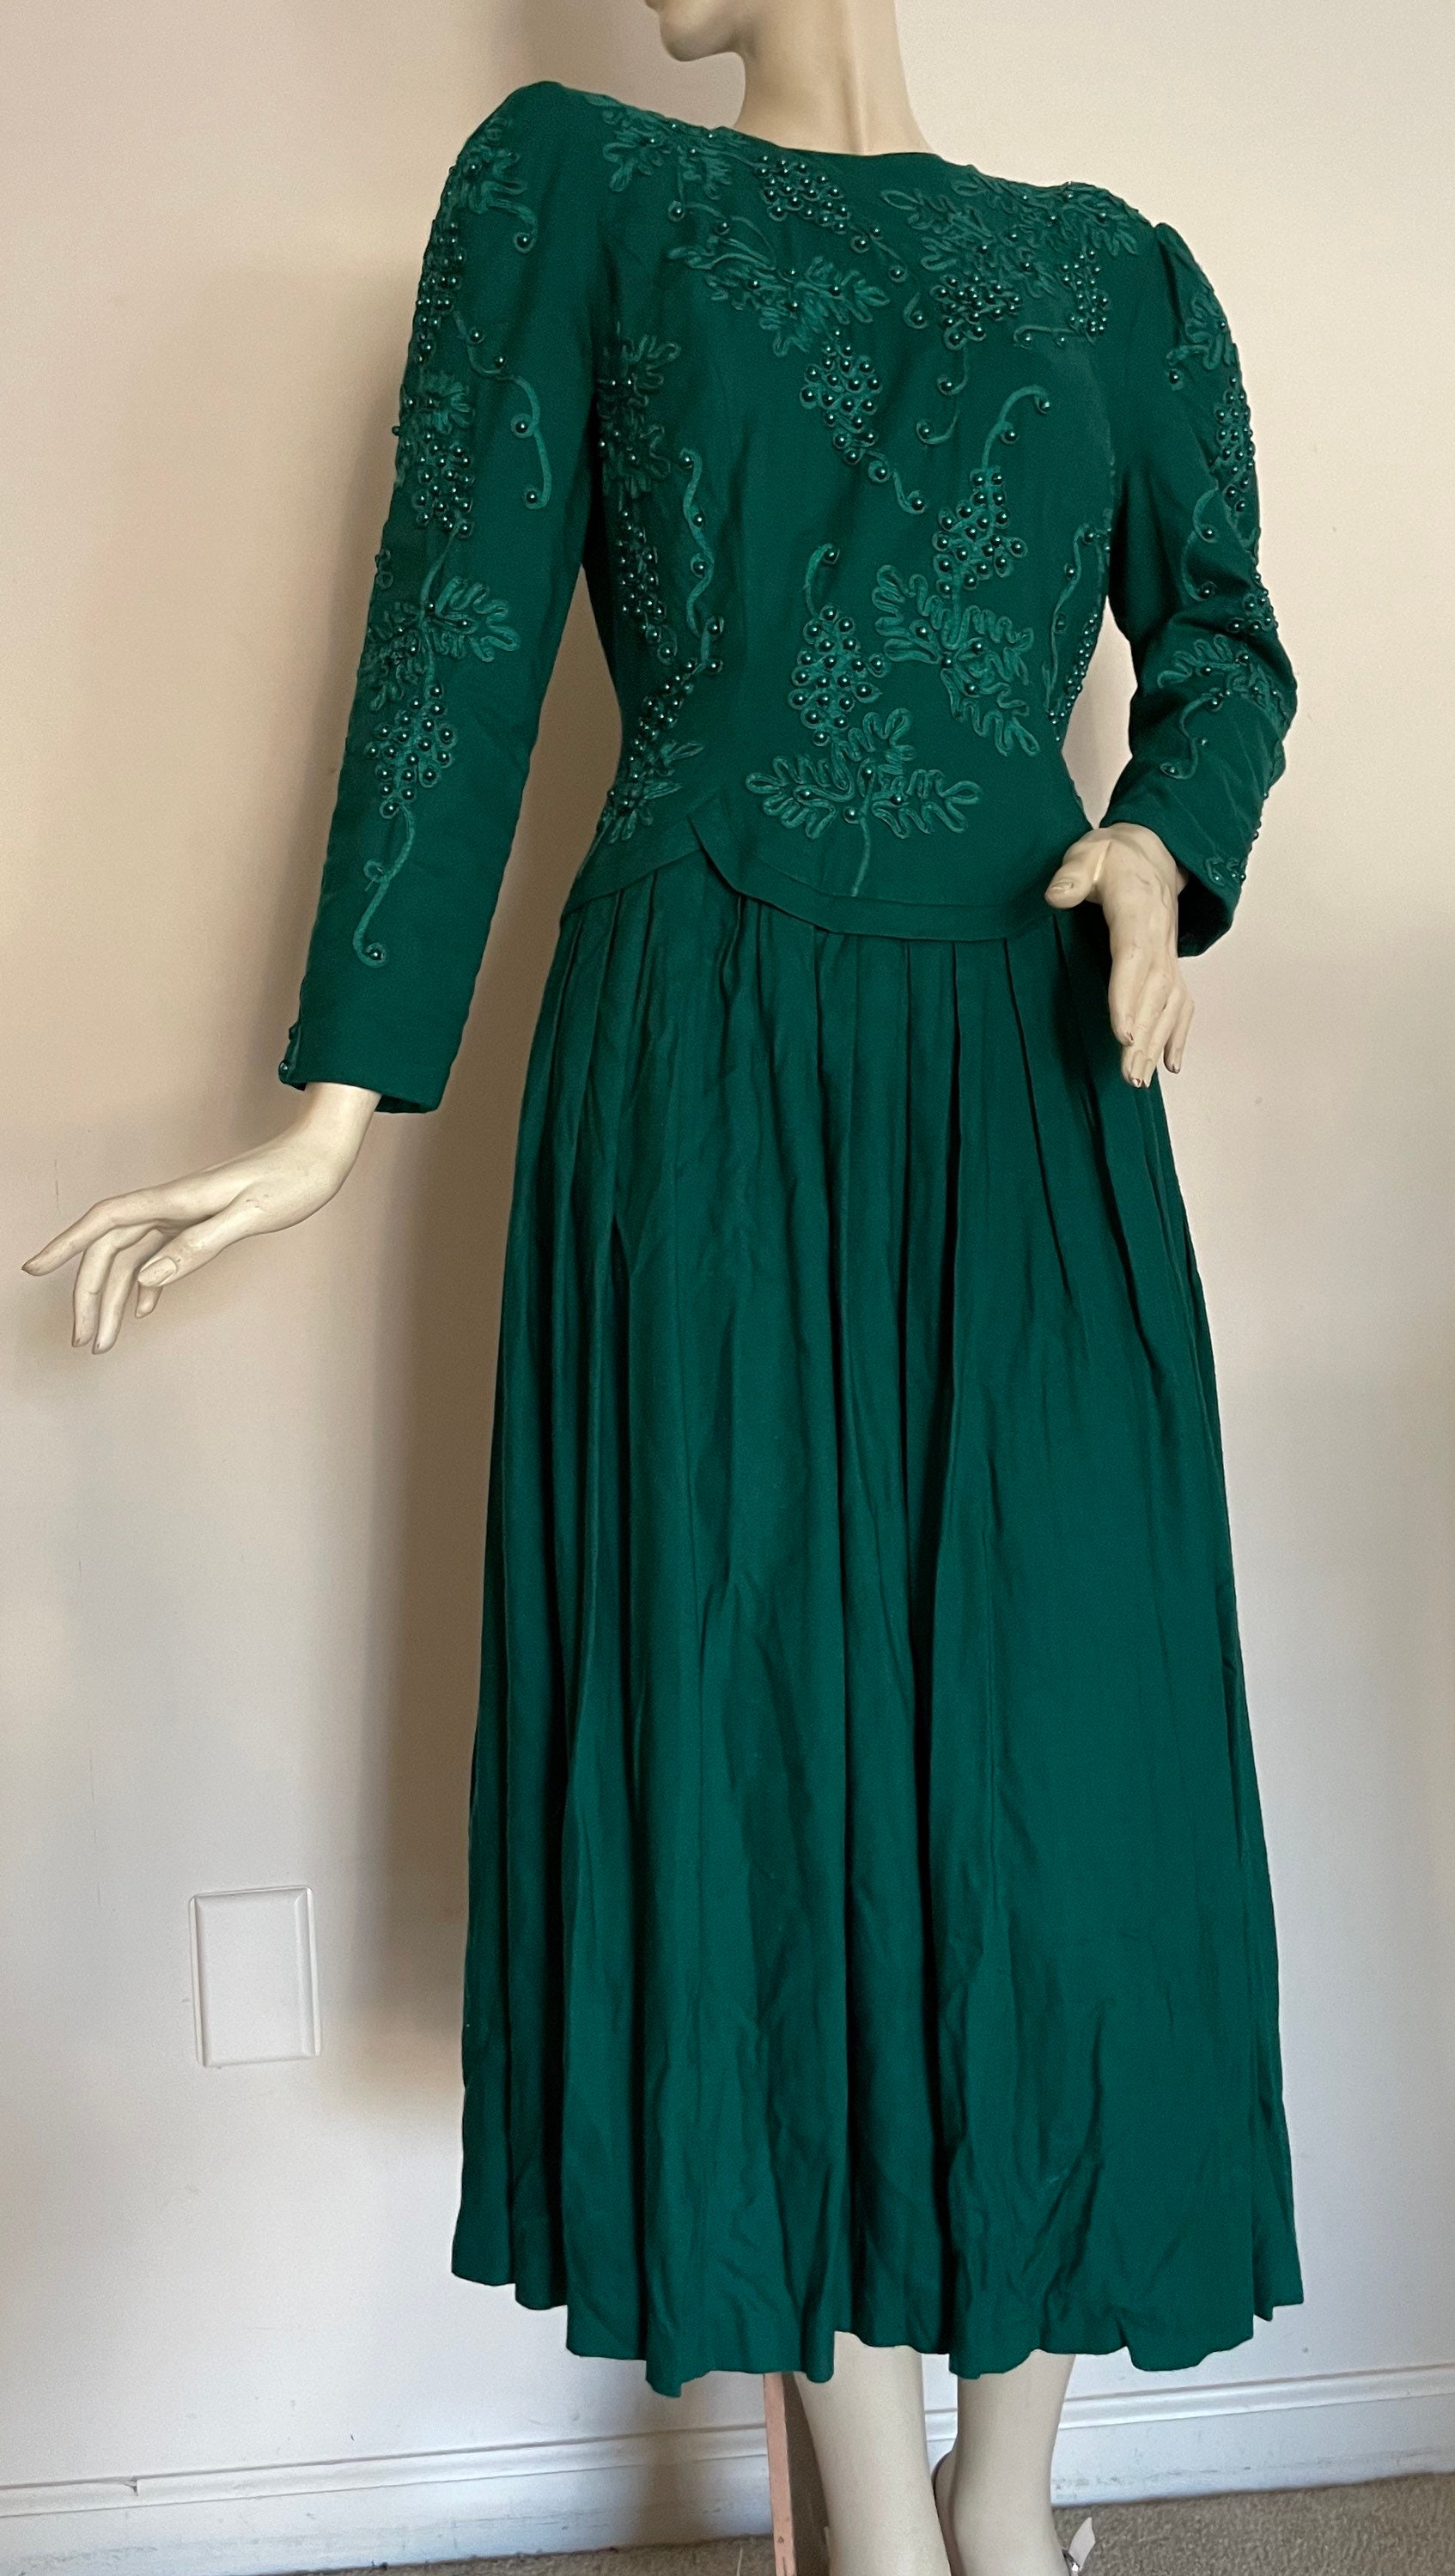 Rich Green 80s Formal Midi Dress With Full Skirt by Marie St - Etsy